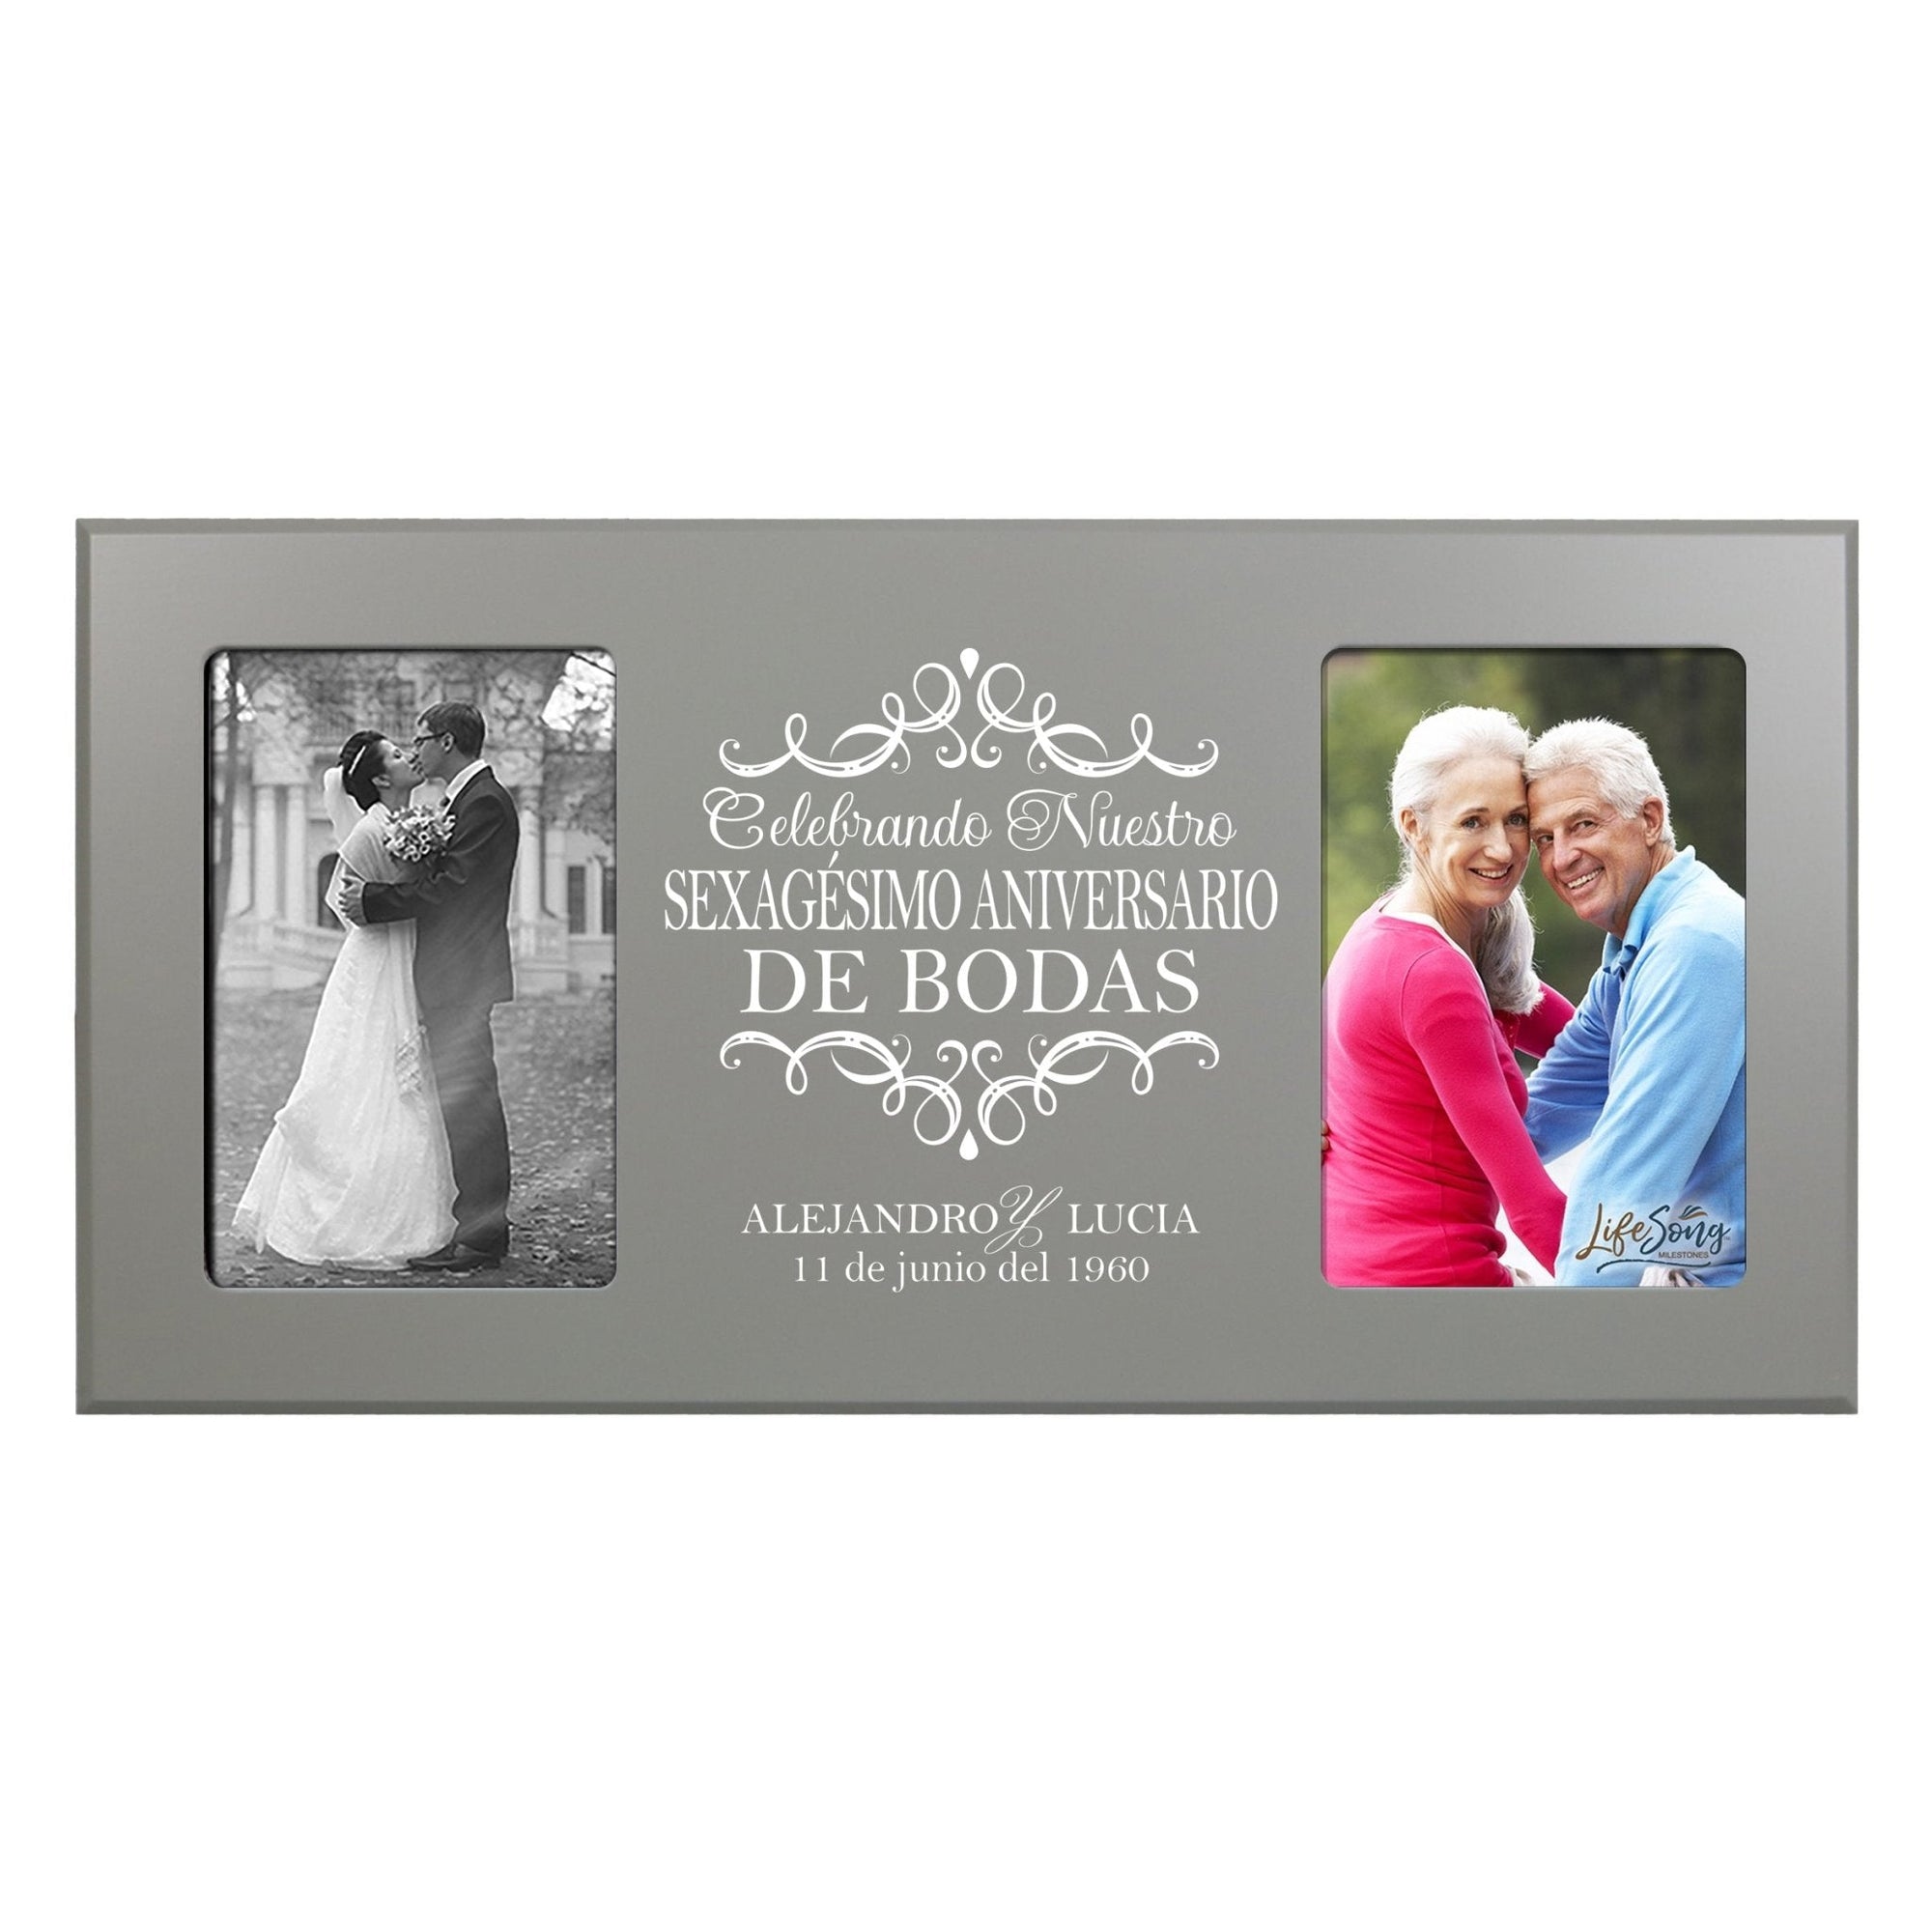 Unique Spanish Picture Frame 60th Wedding Anniversary Home Decor – Personalized Gift for Couples